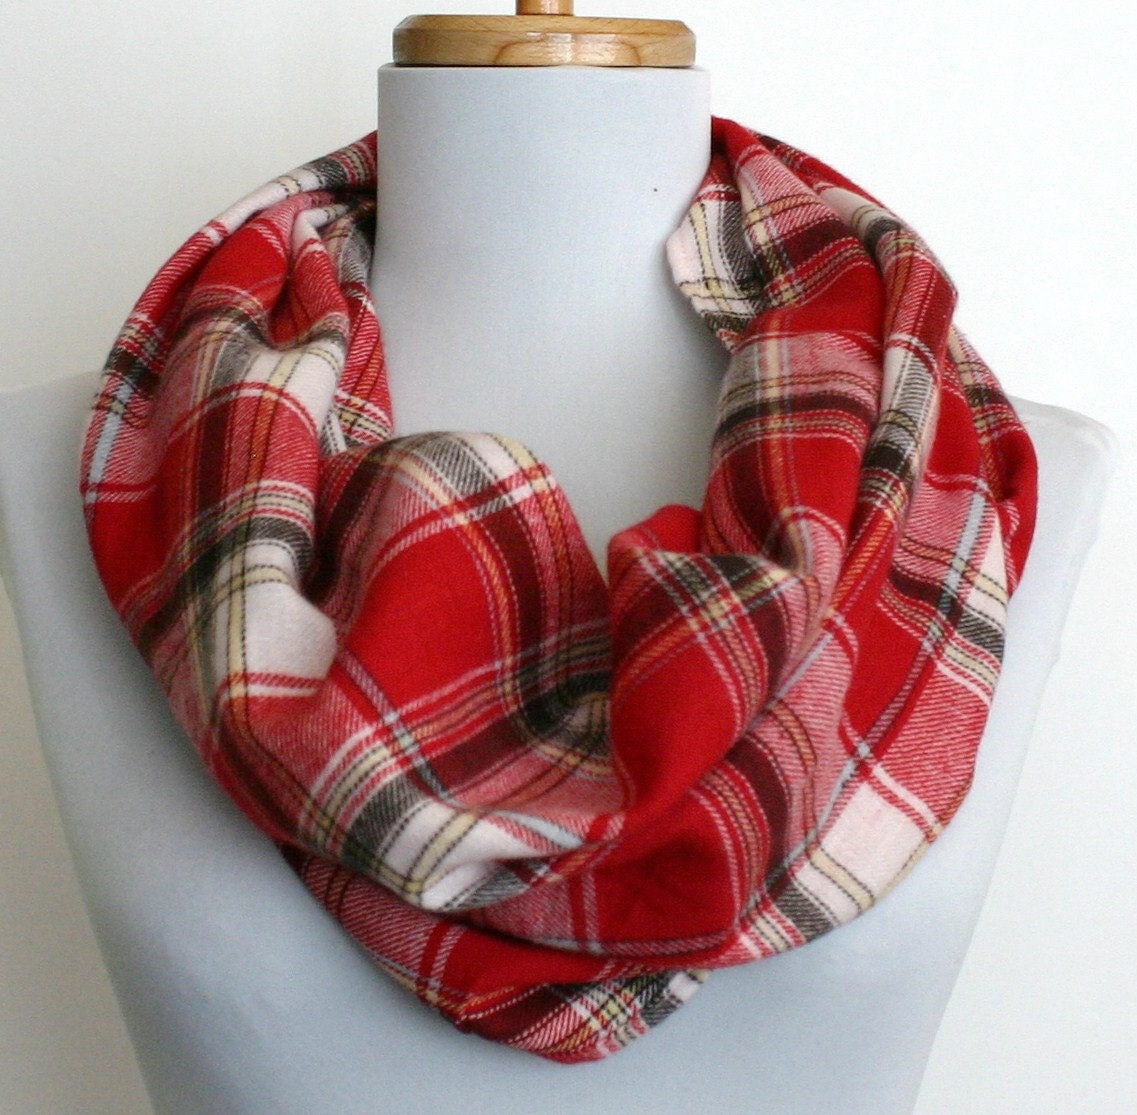 Plaid Flannel Infinity Scarf in red and white